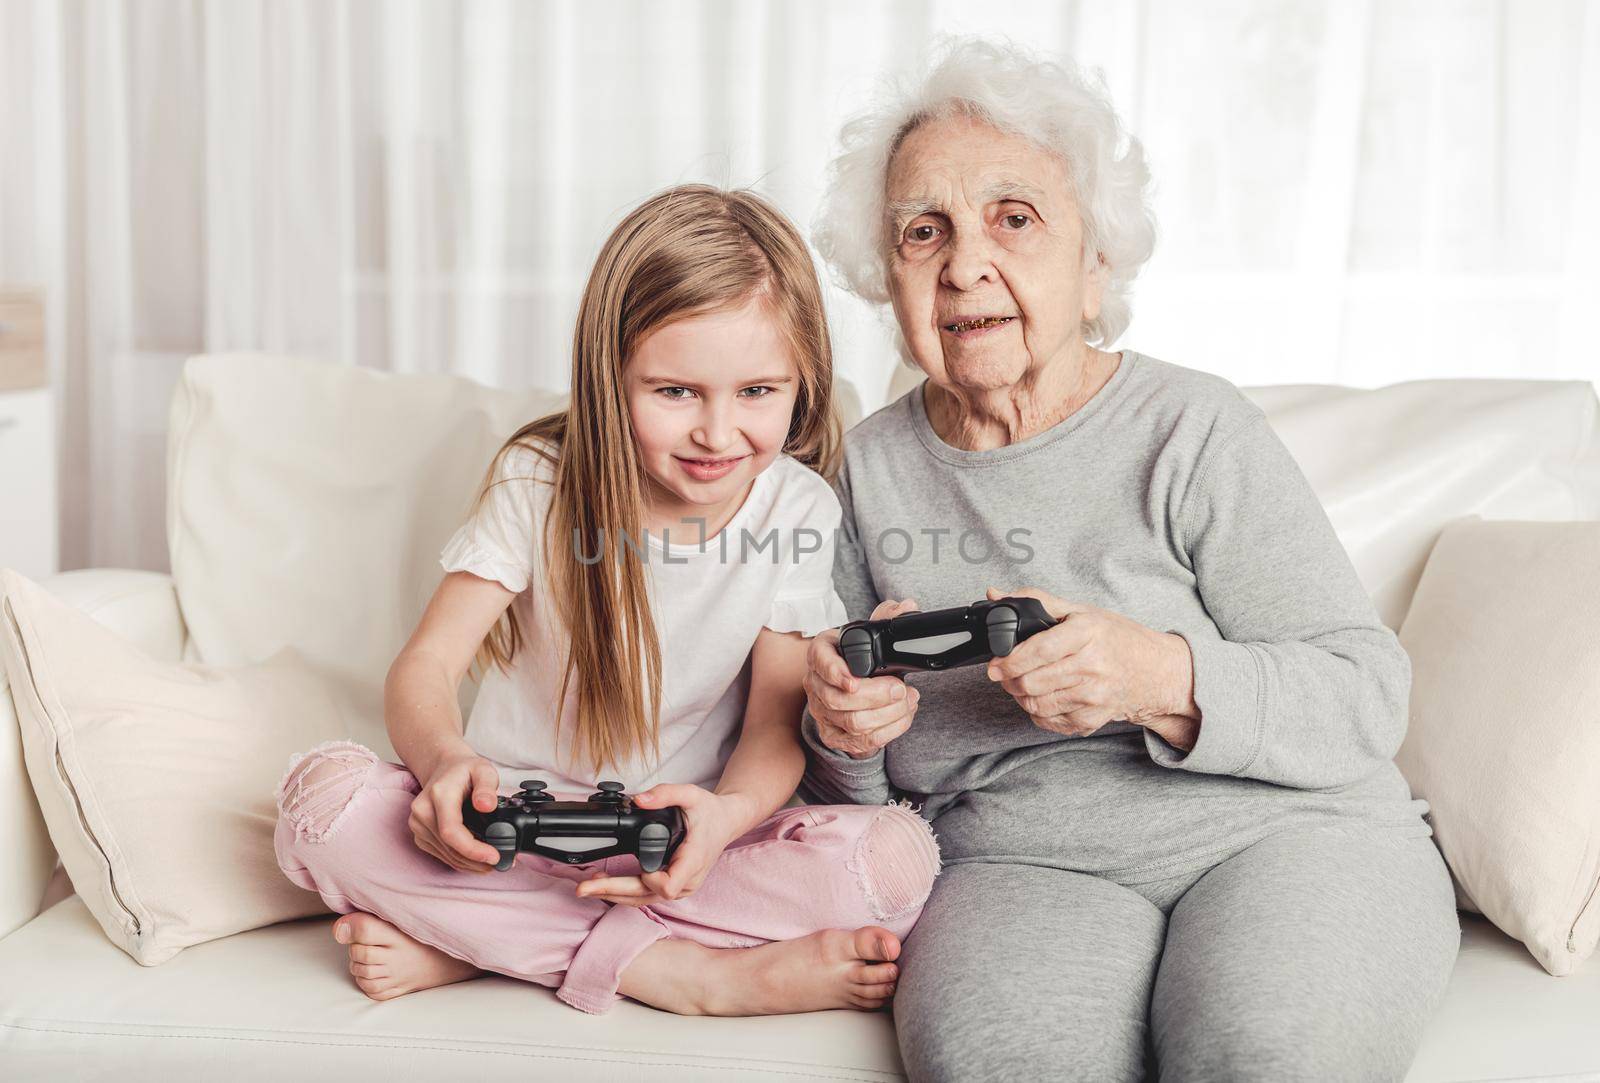 Smiling grandmother with little granddaughter playing games together with gamepads